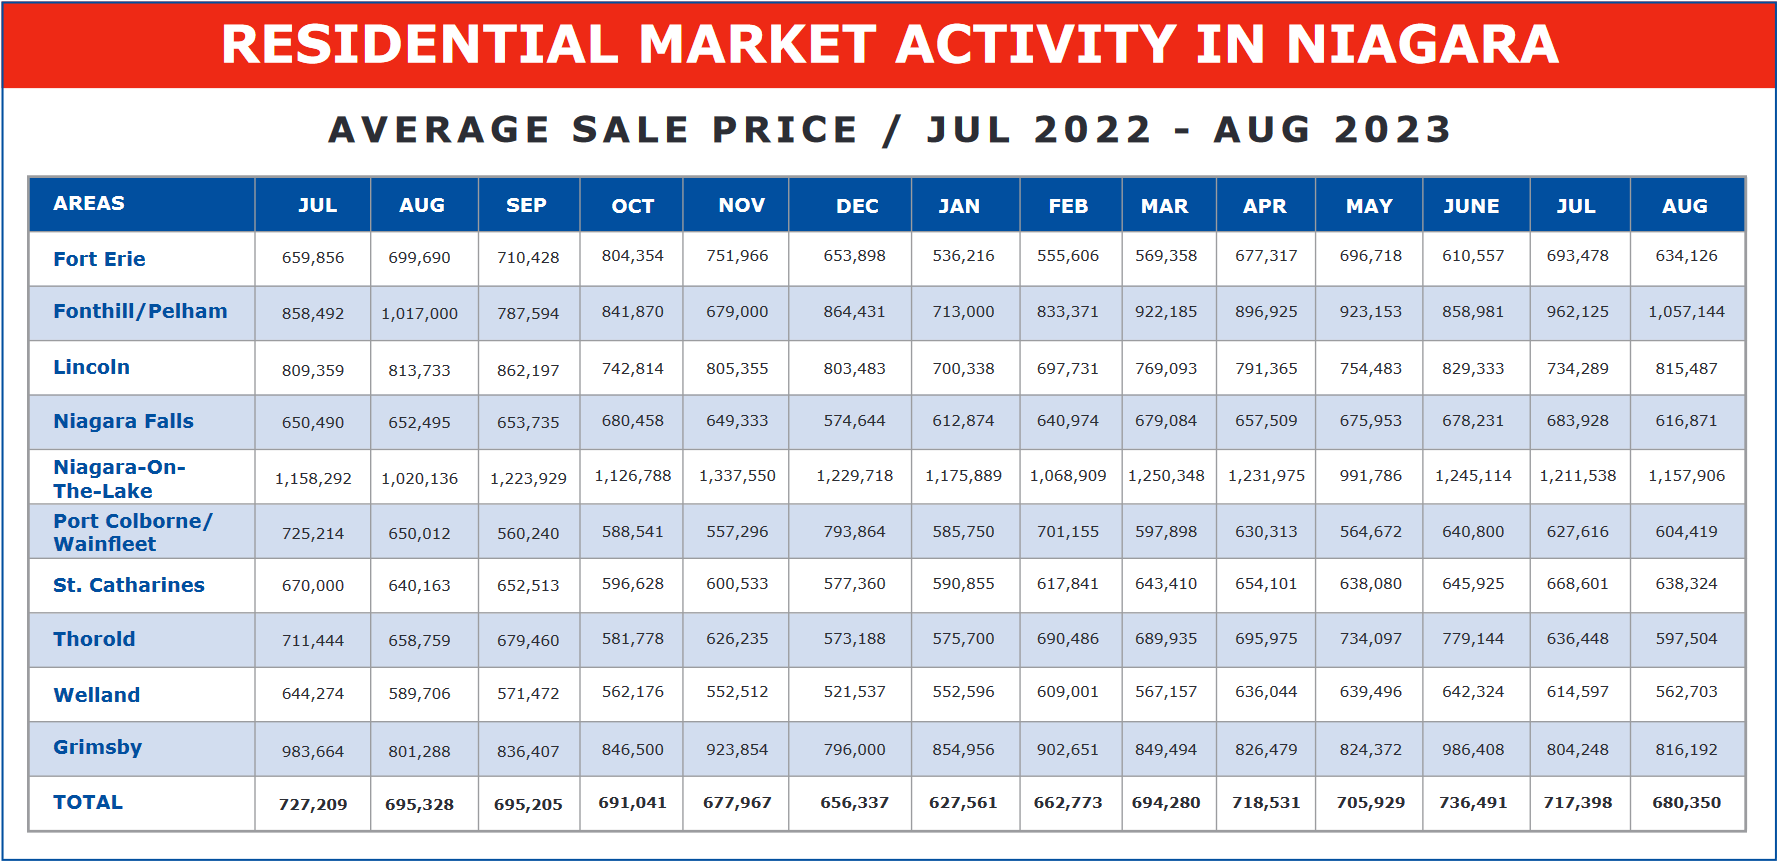 Residential Market Activity In Niagara - AVG Sale Price / July 2022 - August 2023